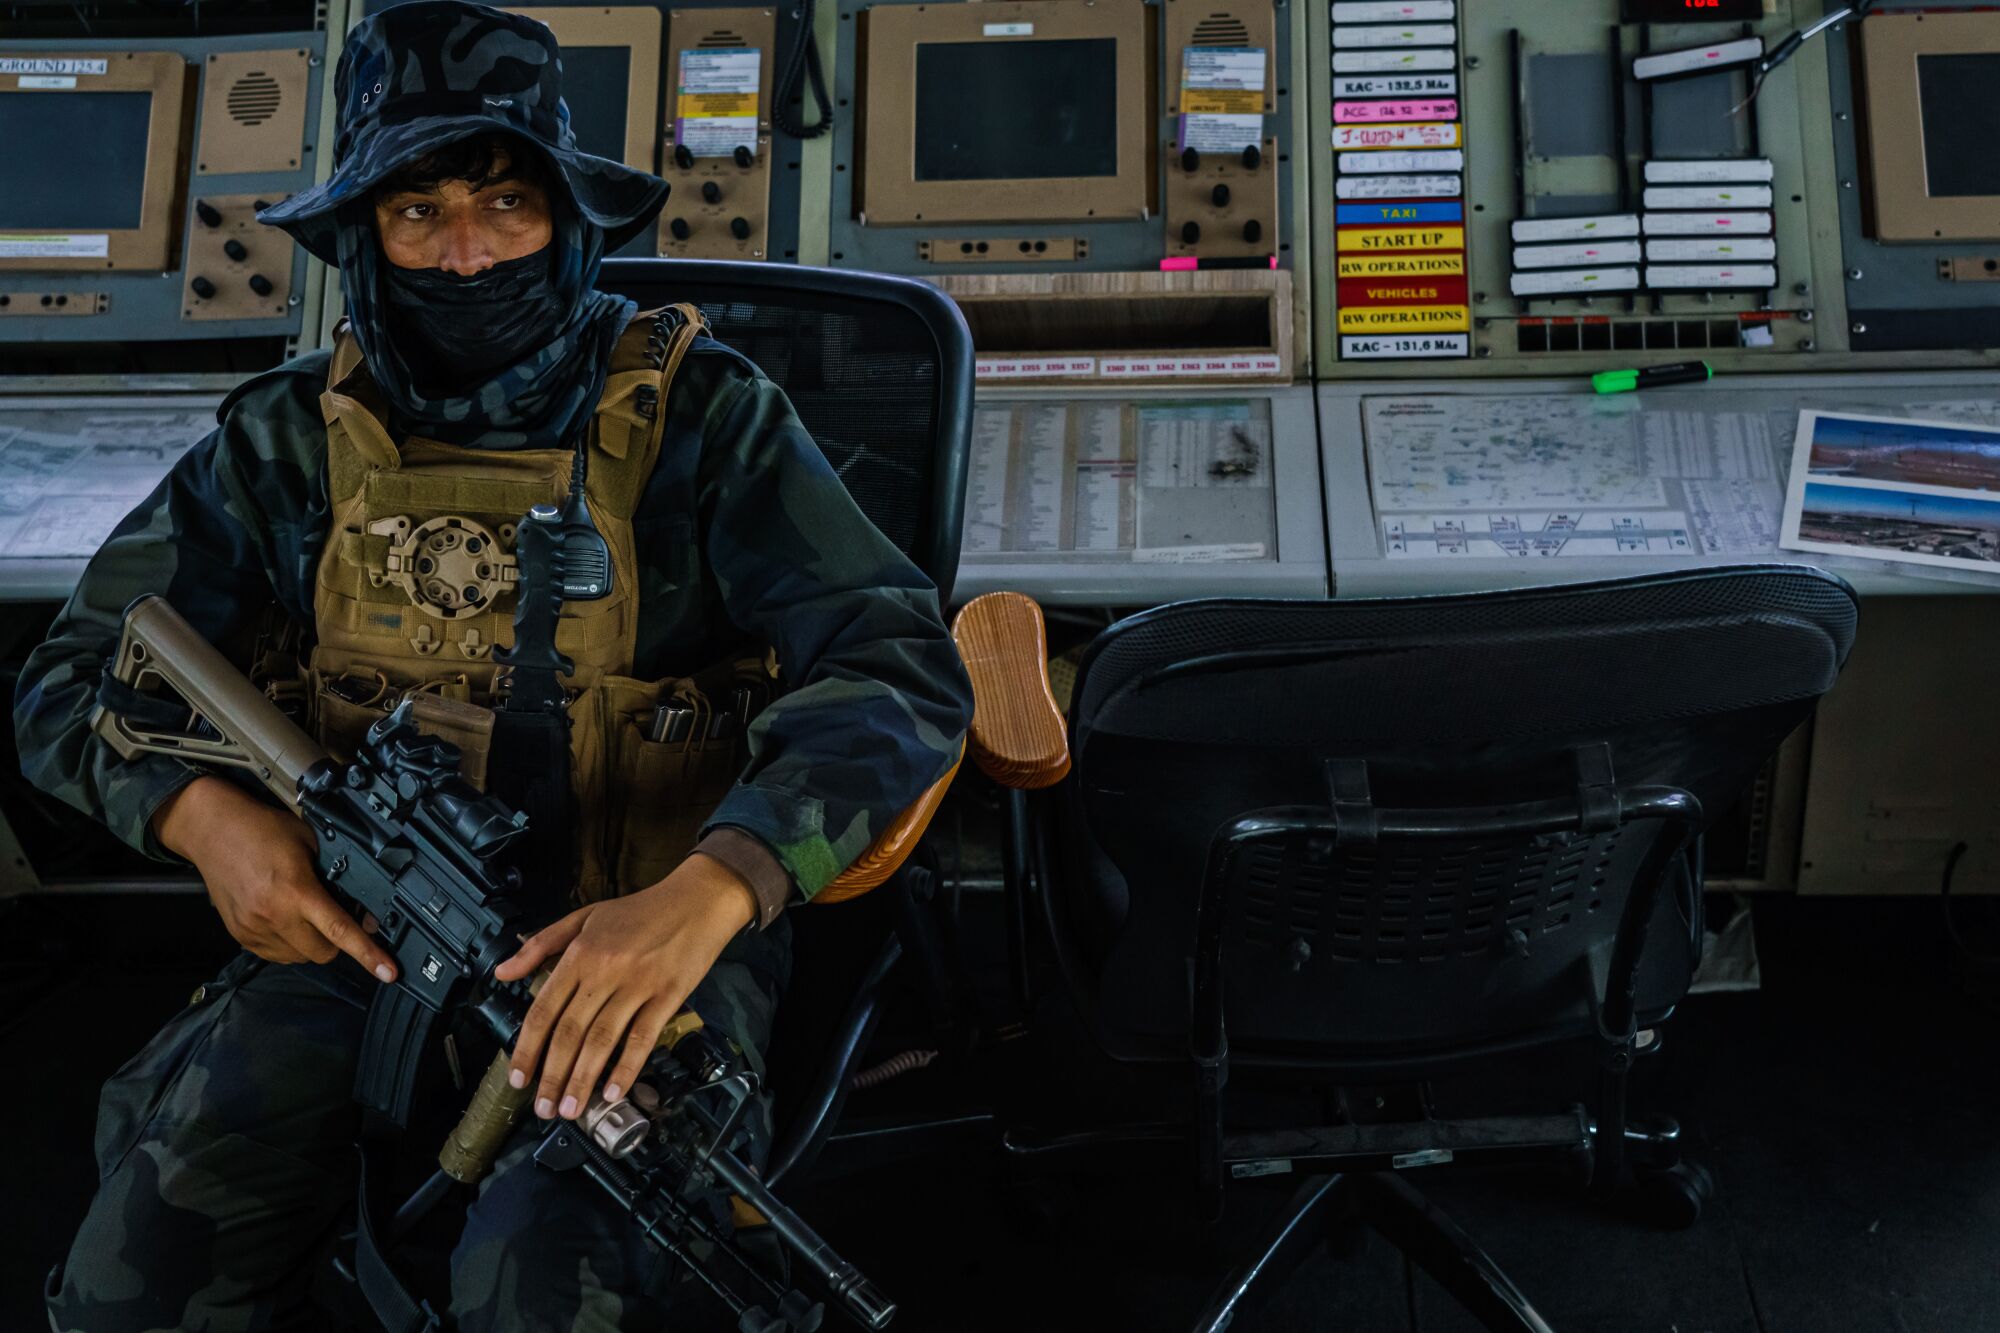 A fighter with a rifle sits inside an airport control tower